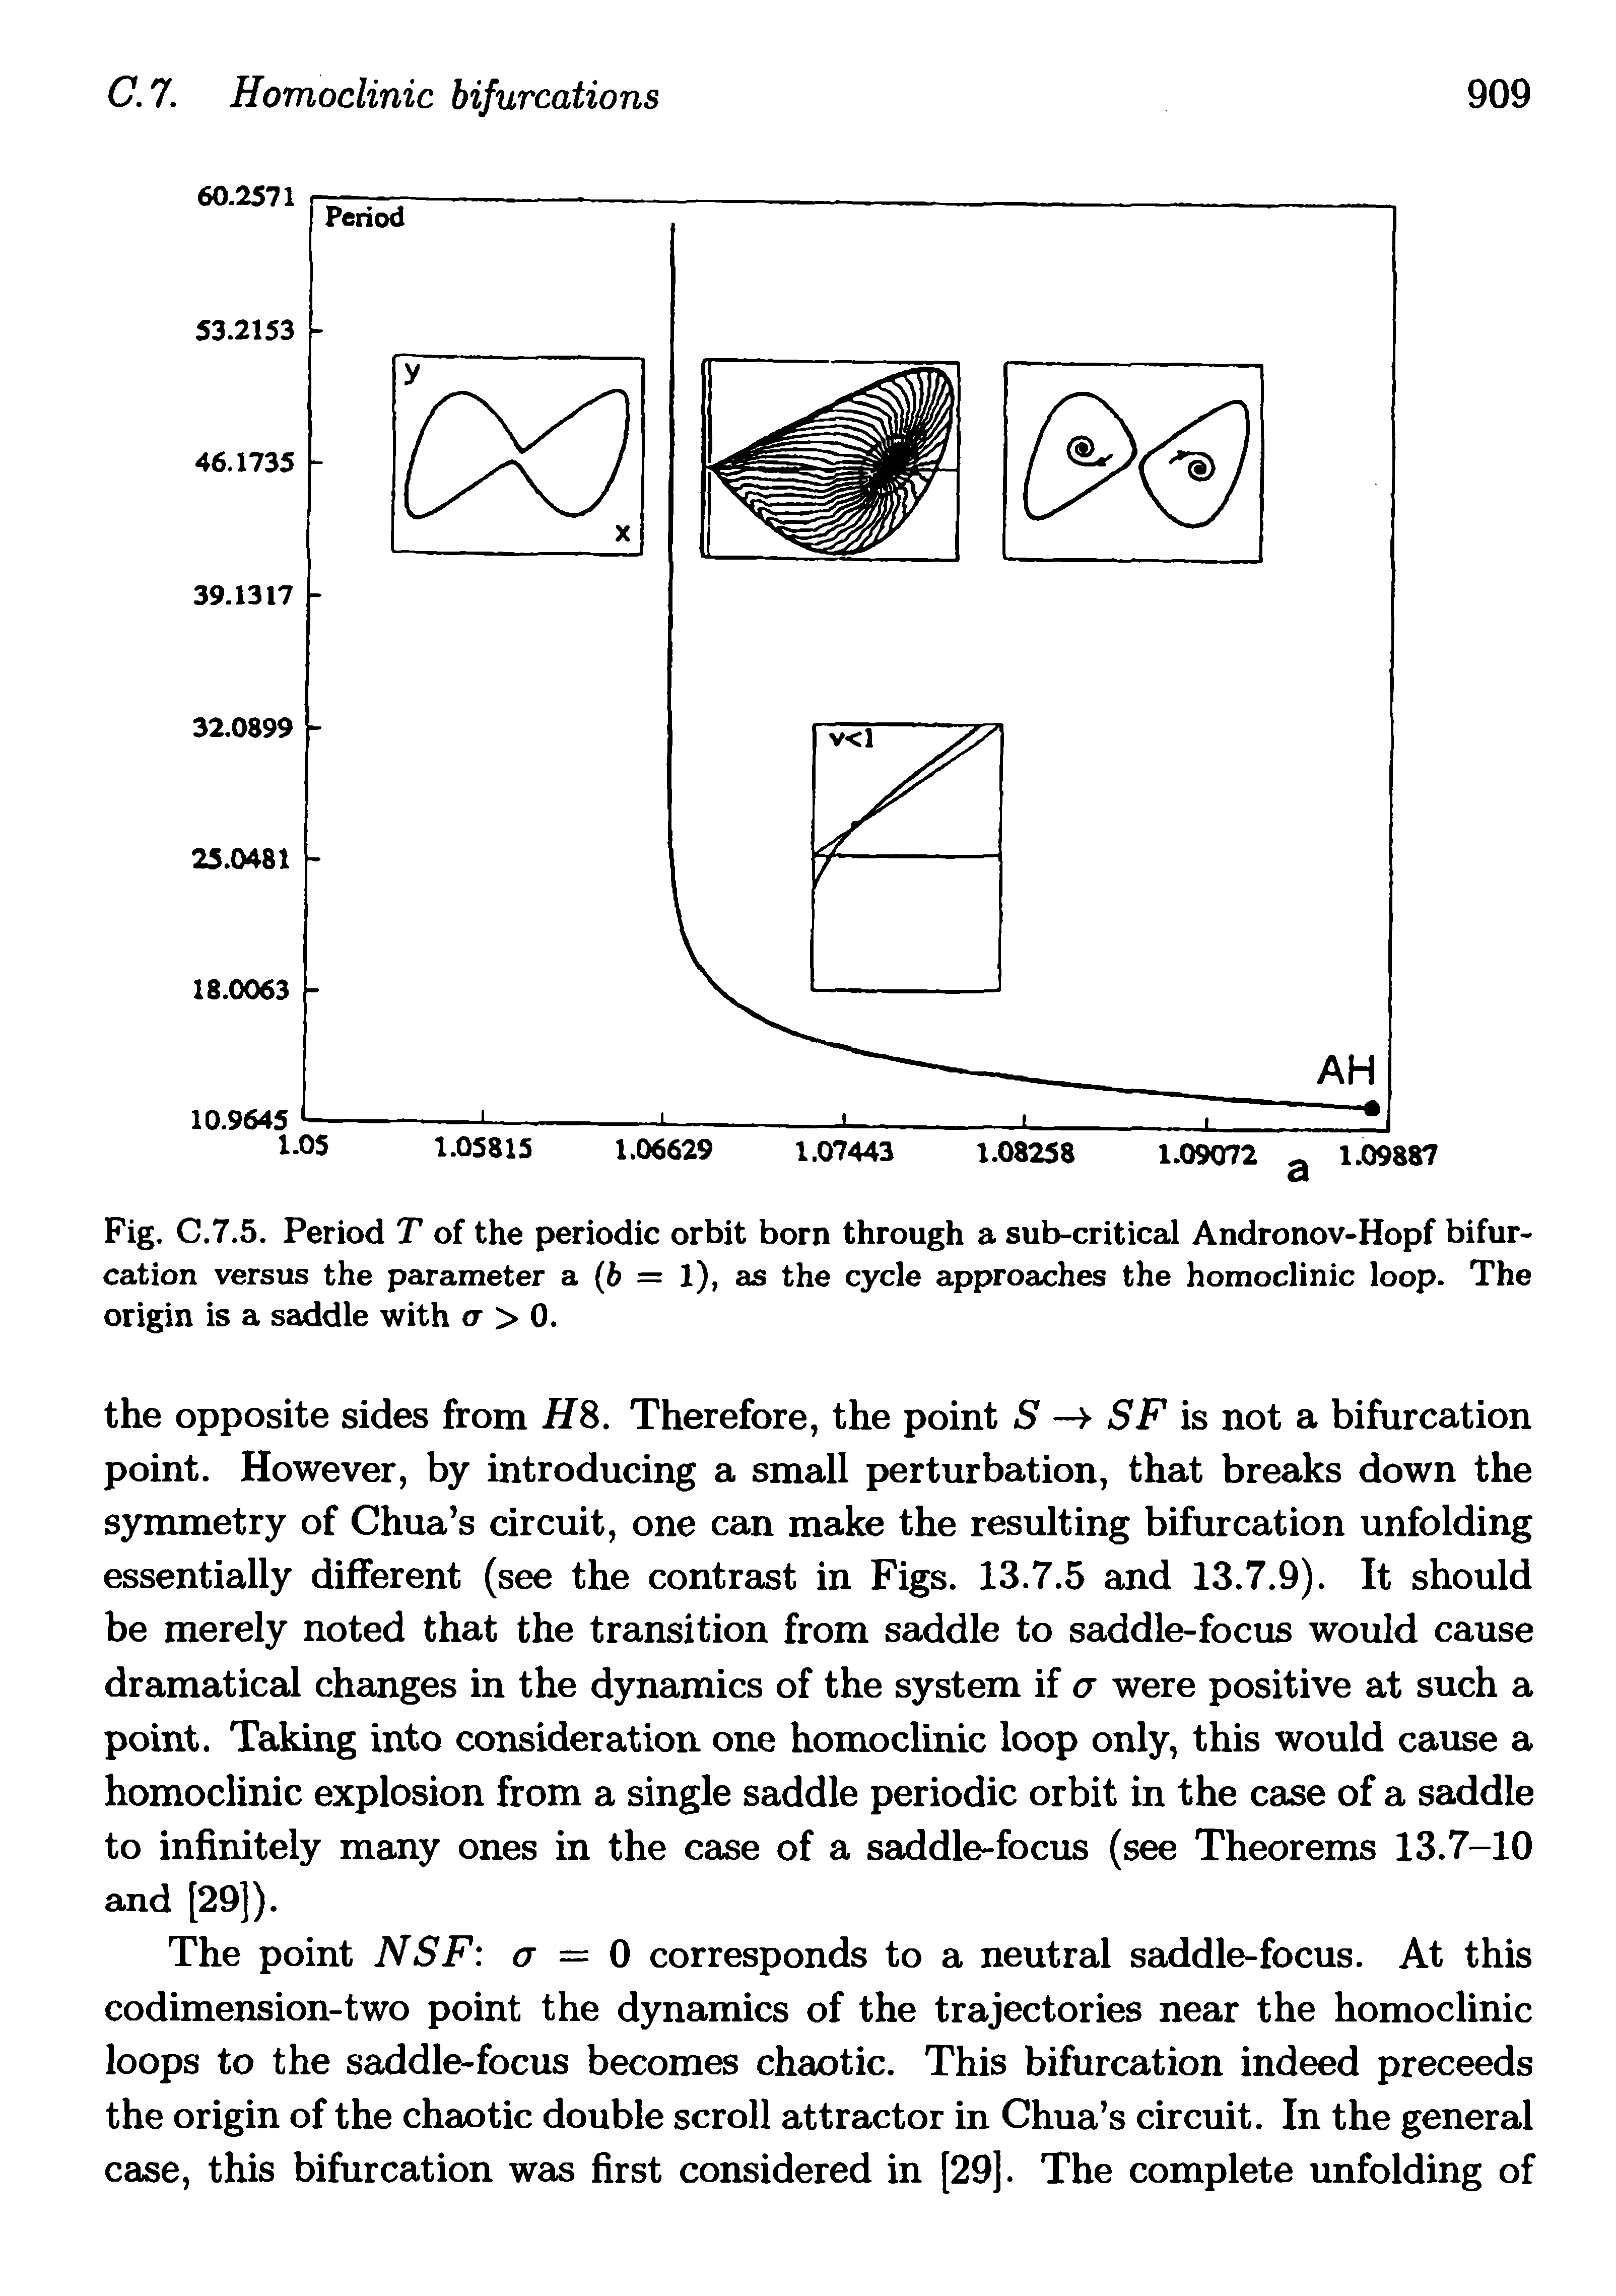 Fig. C.7.5. Period T of the periodic orbit born through a sub-critical Andronov-Hopf bifurcation versus the parameter a (6 = 1), as the cycle approaches the homoclinic loop. The origin is a saddle with <r > 0.